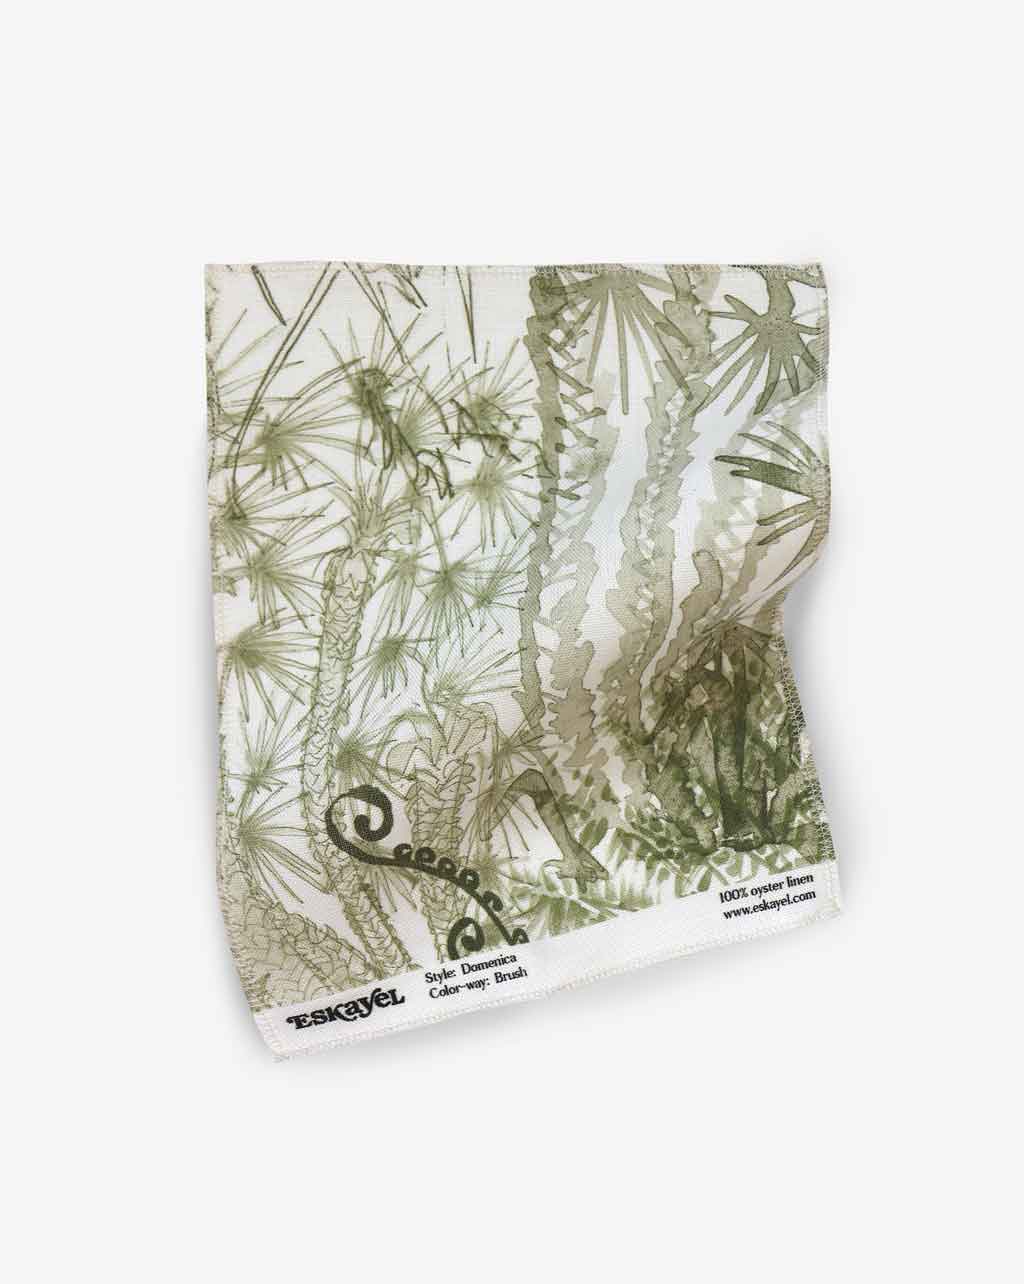 A piece of Domenica Fabric with an image of plants on it